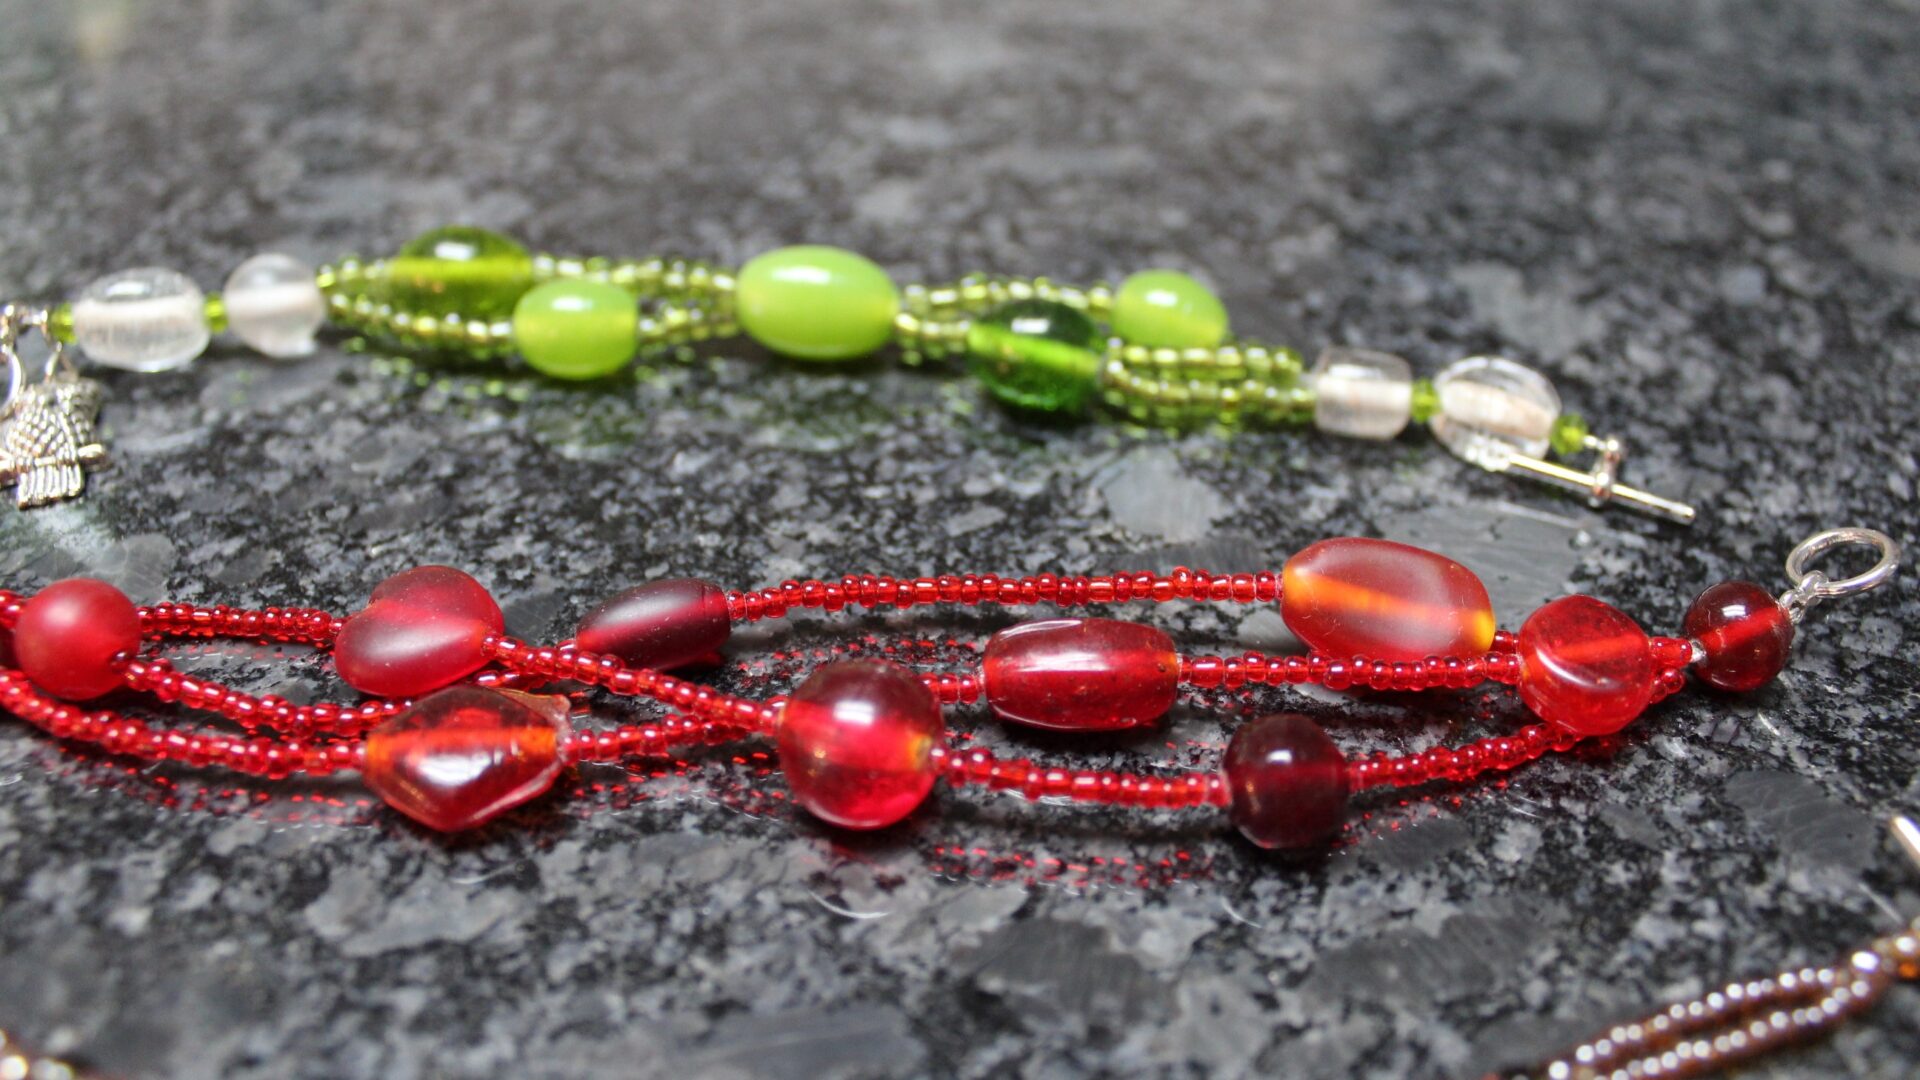 Two necklaces of different colors are shown on a table.